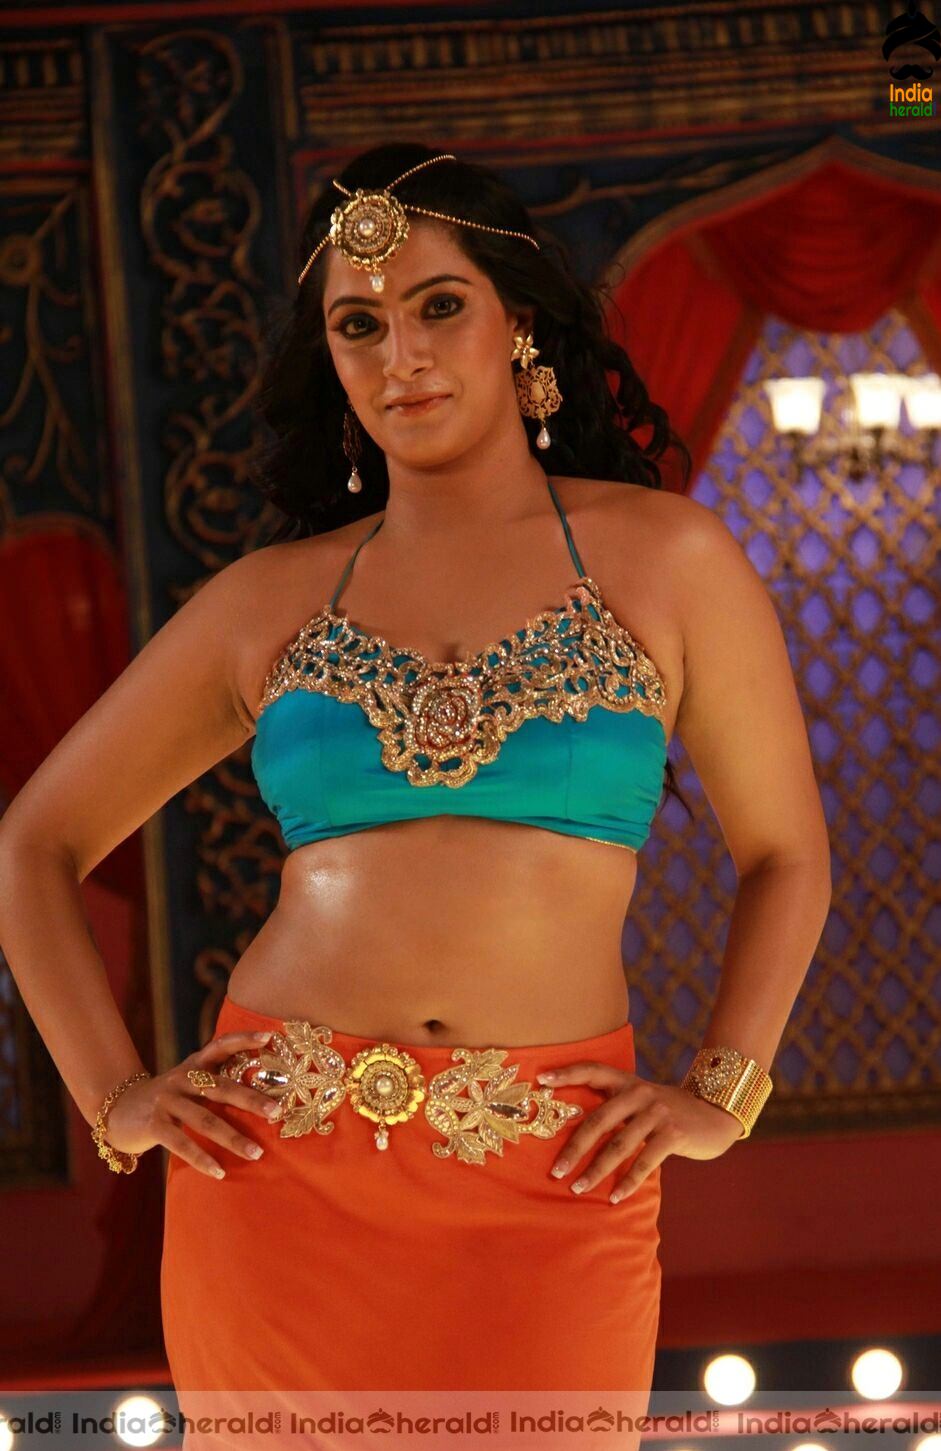 Hottest Exposing Photos of Varalaxmi and Anjali flaunting their fleshy belly and assets Set 1